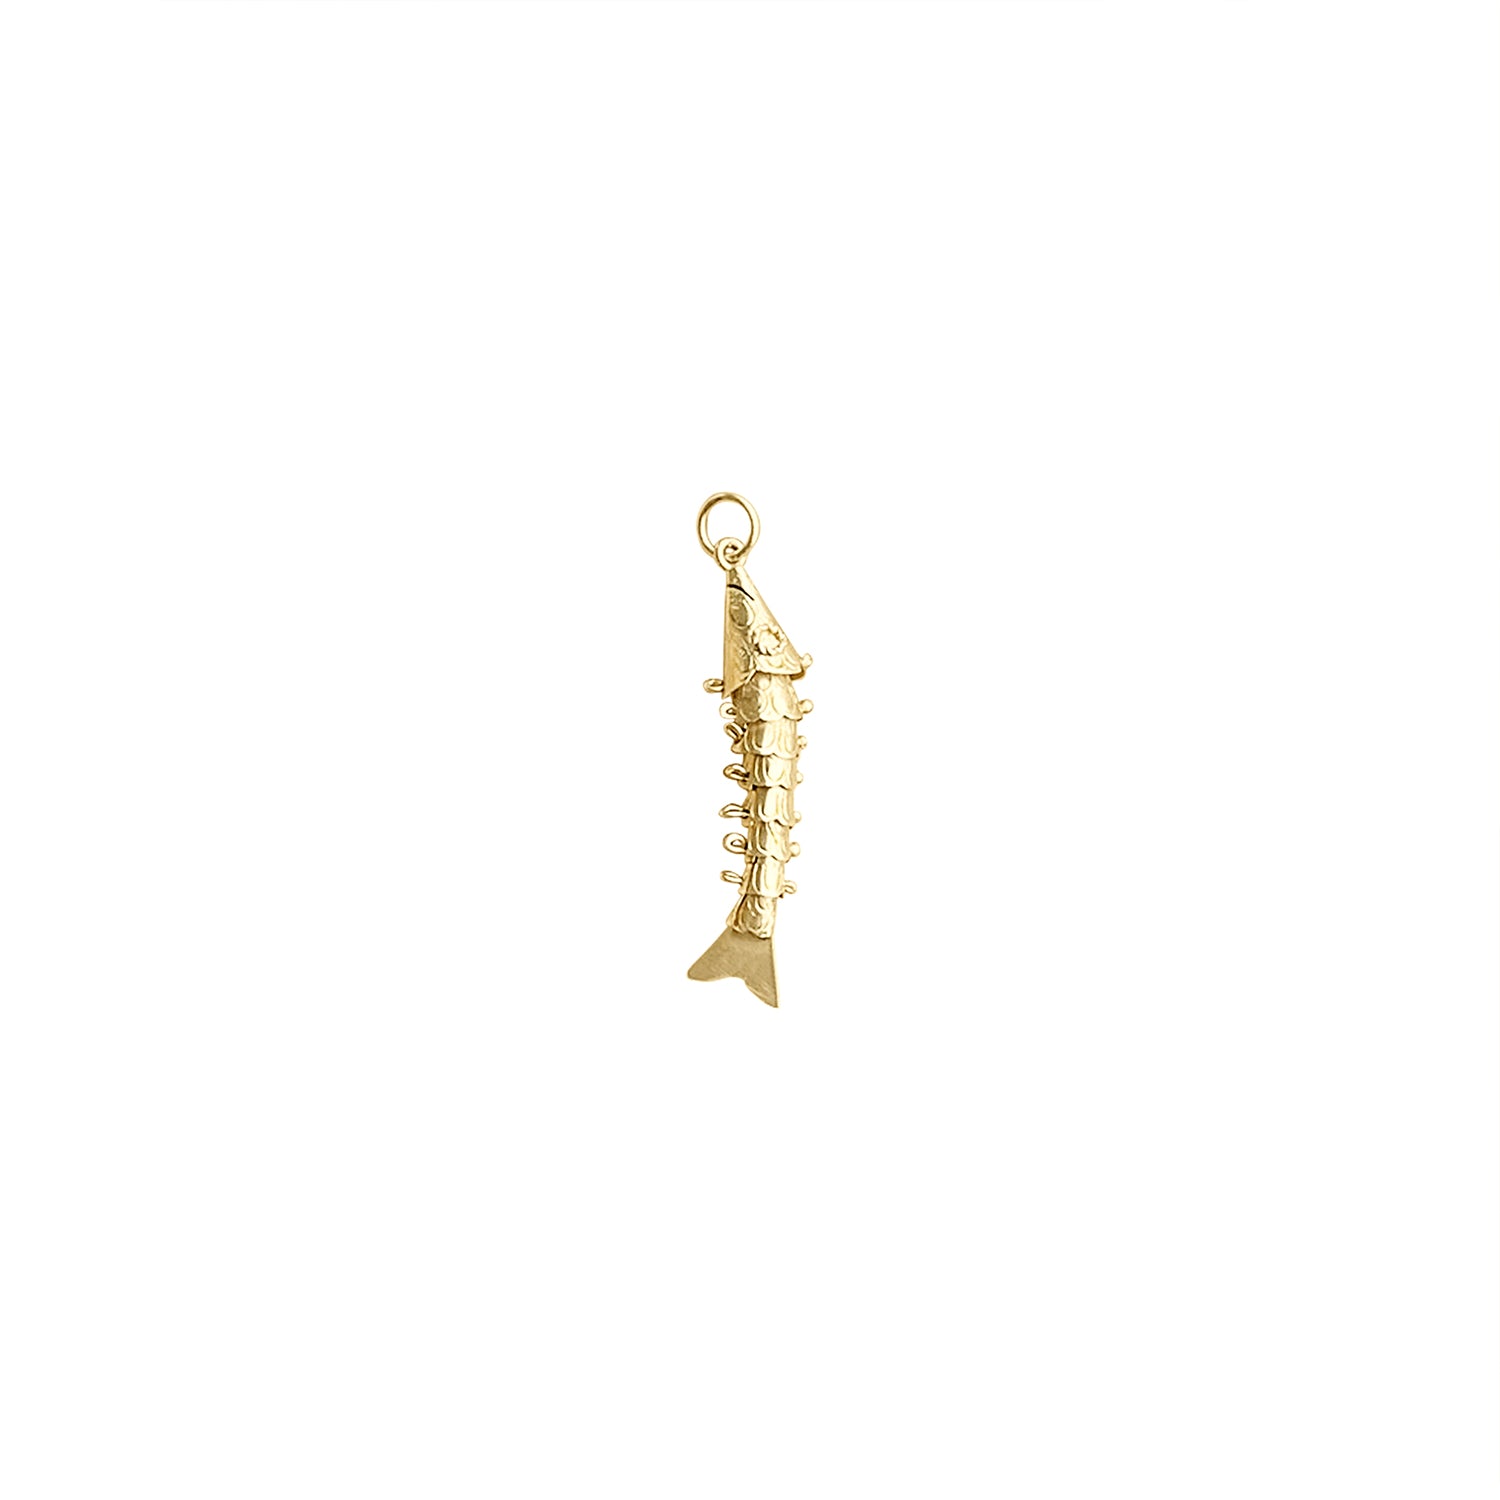 Vintage Articulated Fish Charm by Fewer Finer